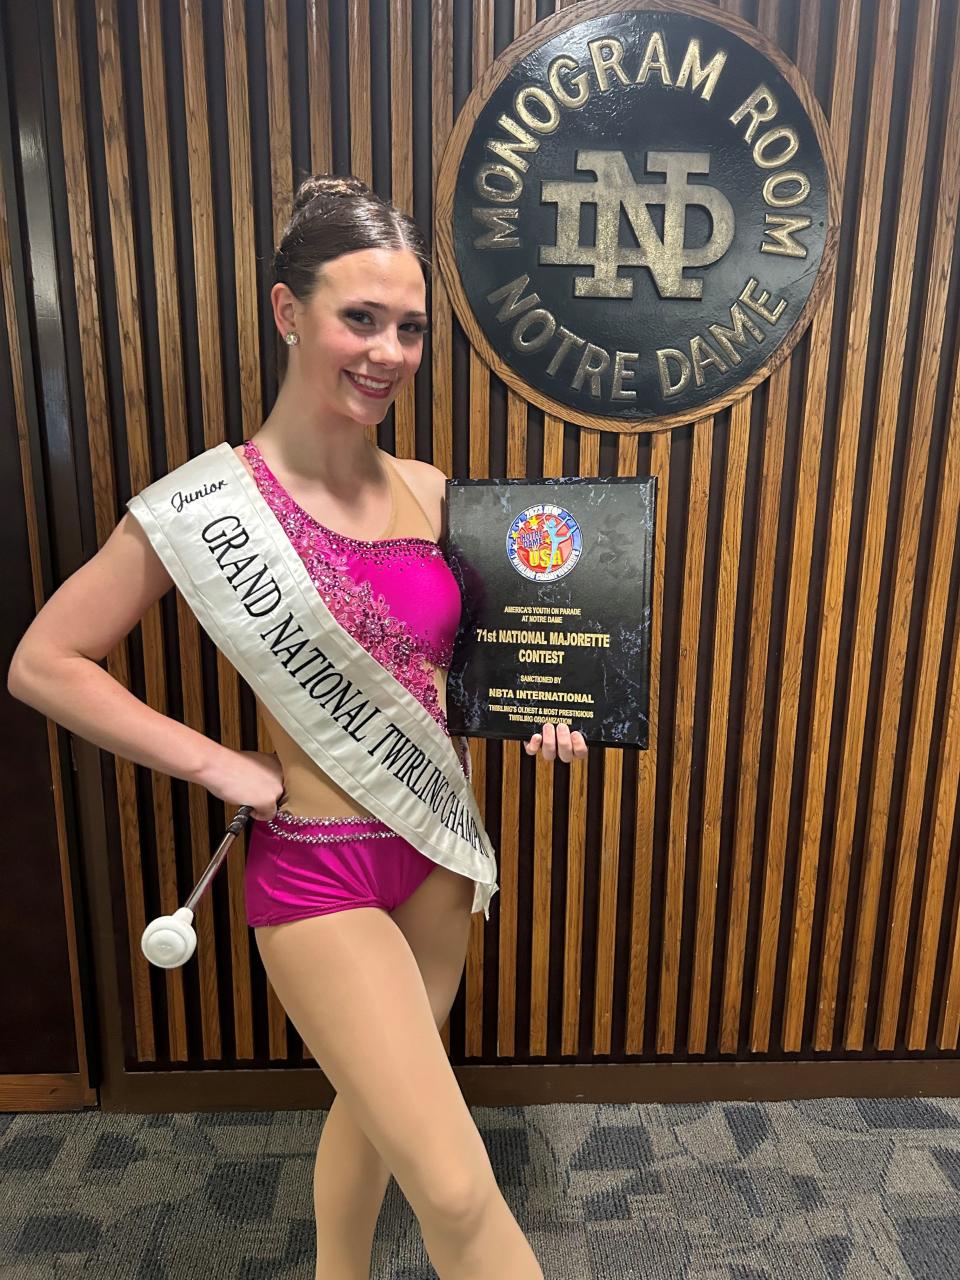 Micah Beaudoin, an Arlington High School student, poses with her plaque after being named grand champion of a national twirling competition in Indiana last July.